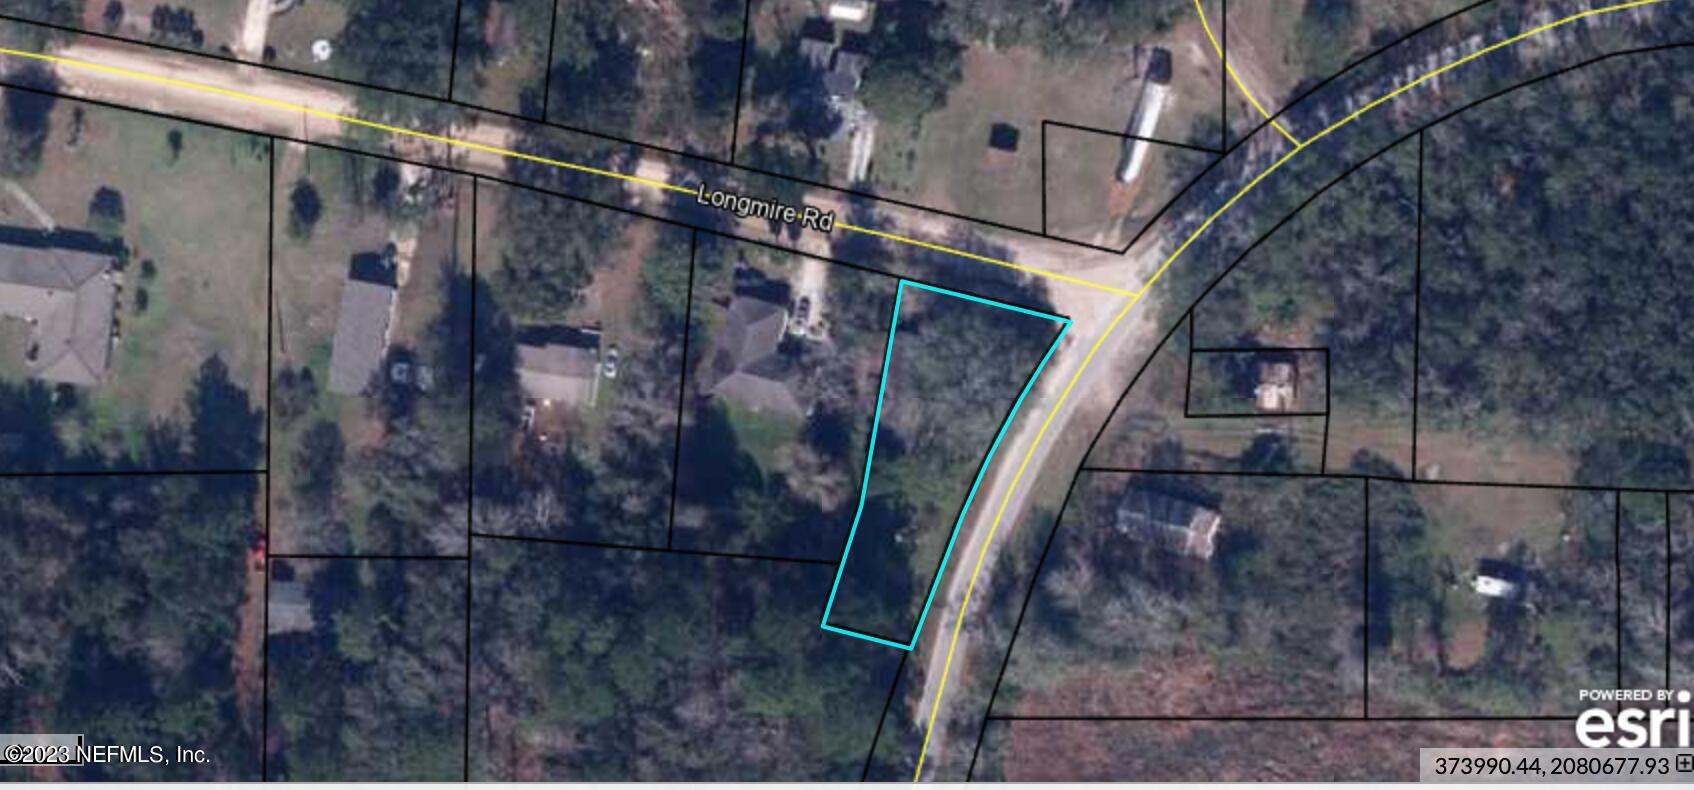 Middleburg, FL home for sale located at 4355 Longmire Road, Middleburg, FL 32068